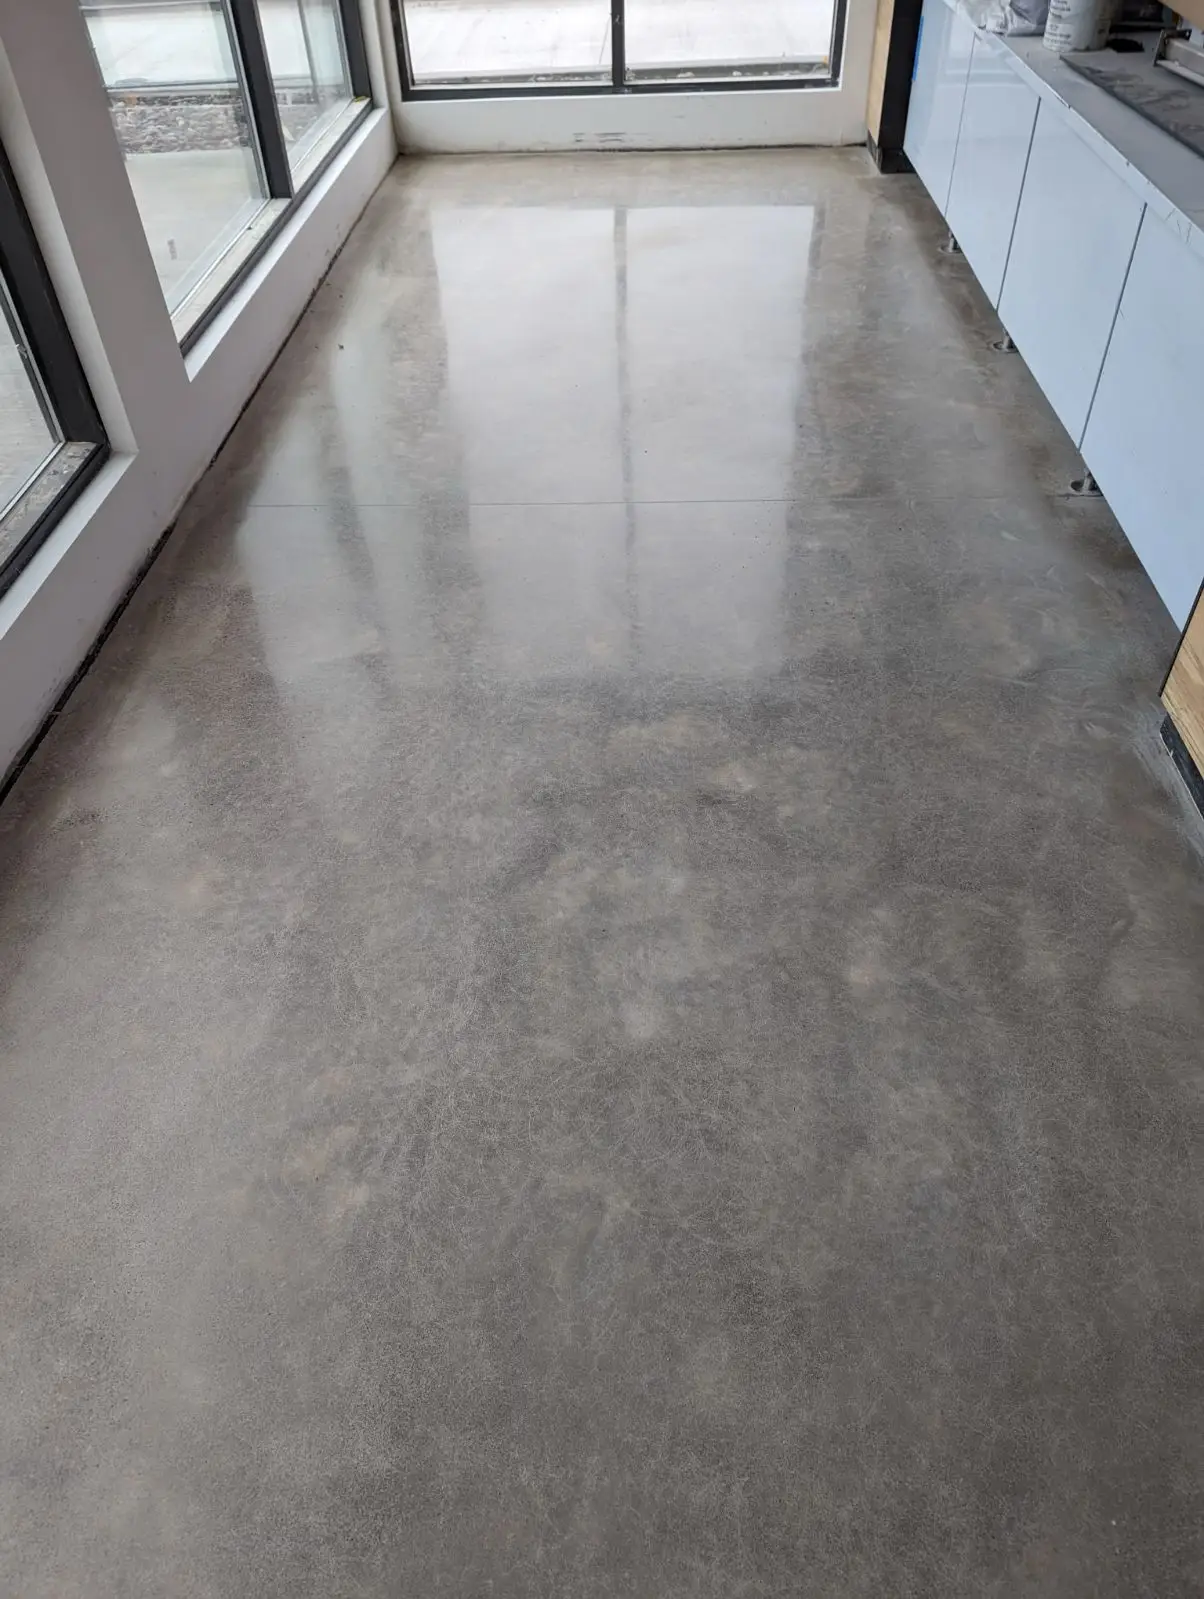 Polished Concrete Floors at a Finished Chipotle